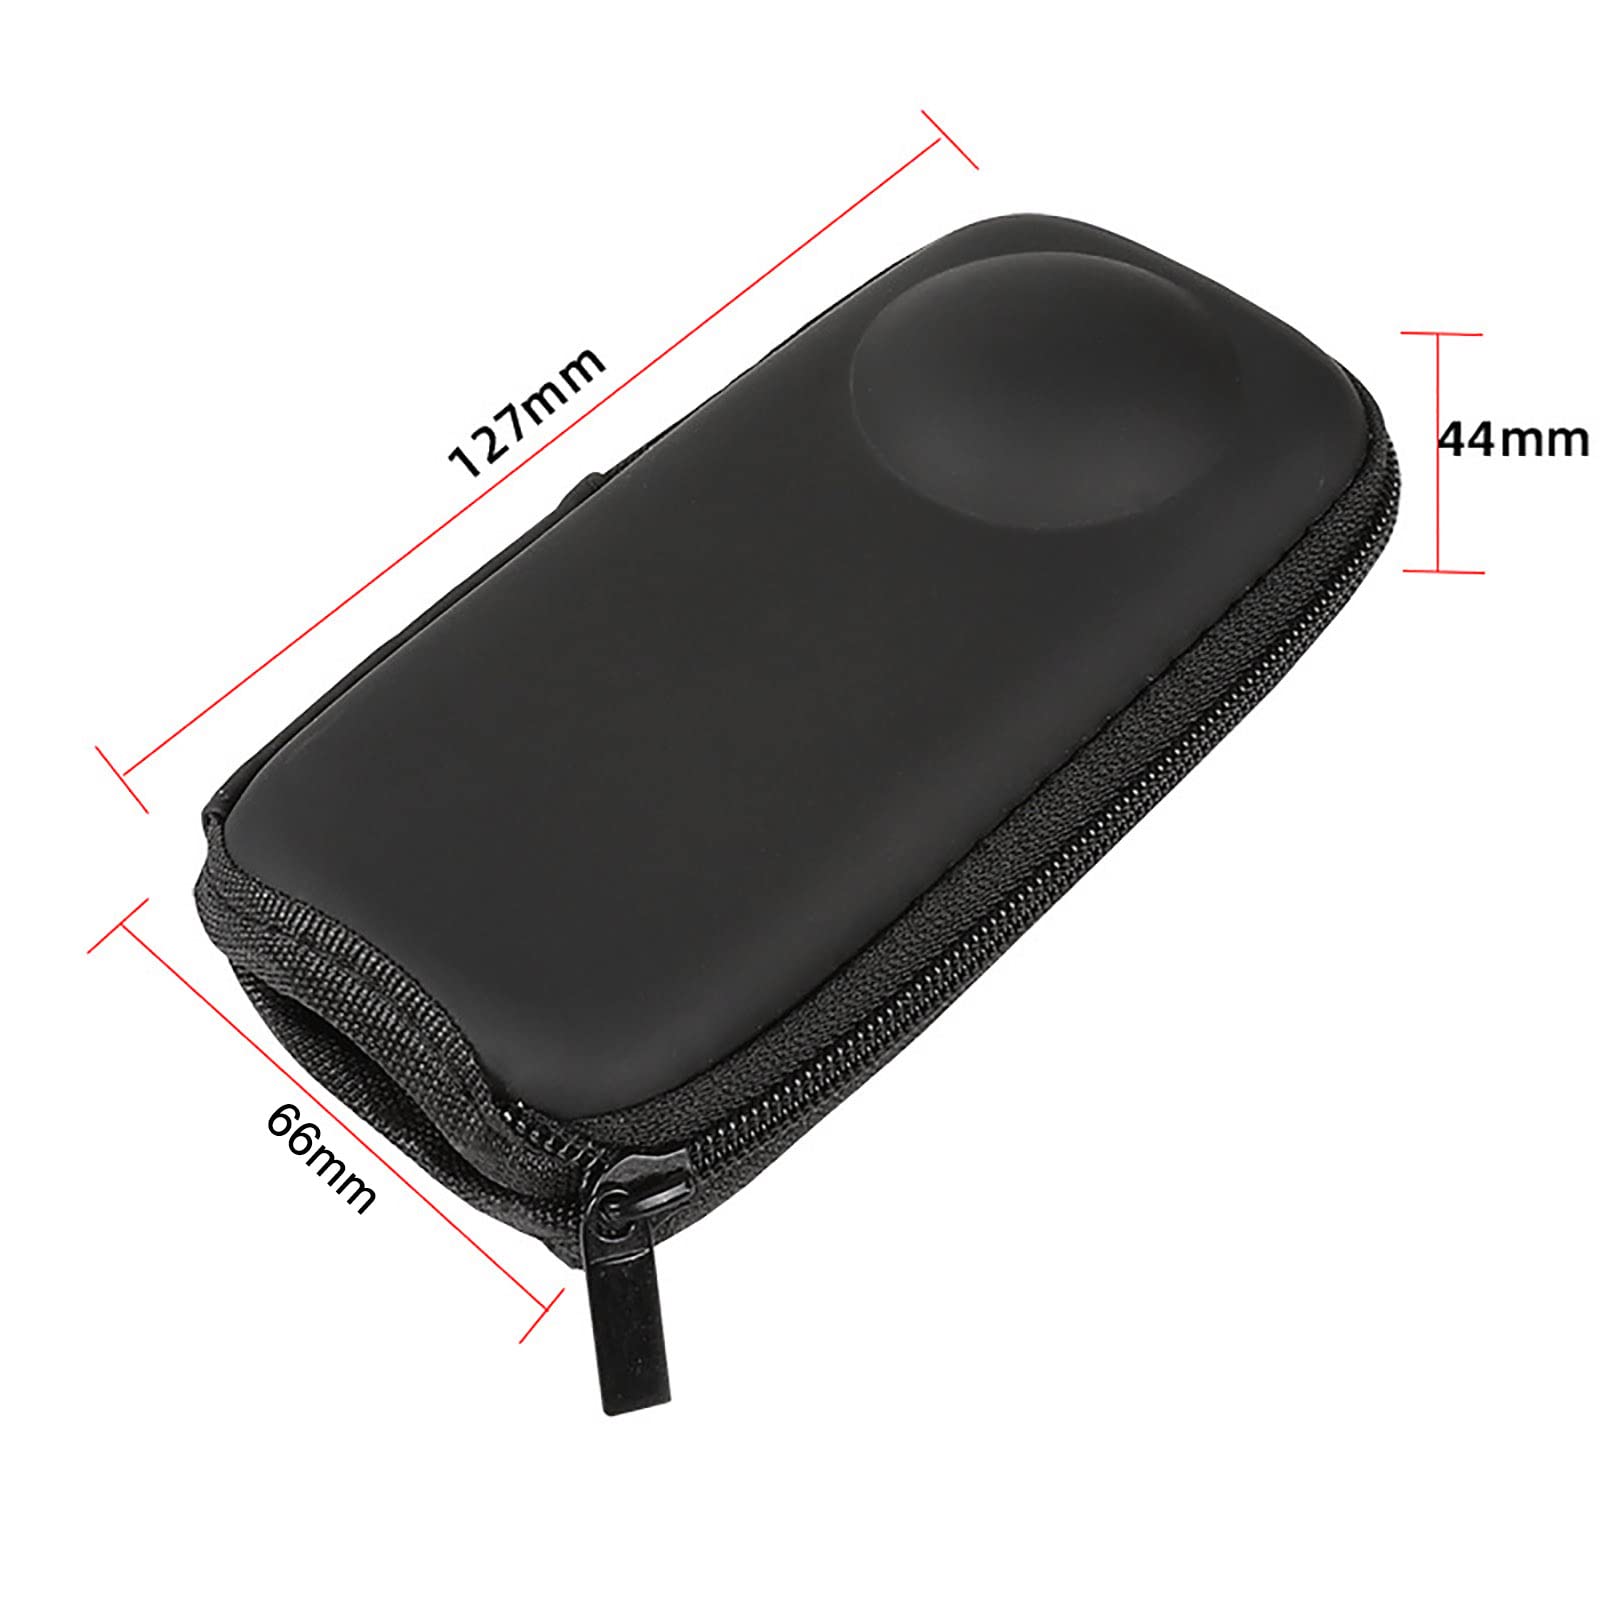 HUAYUWA Carry Case Compatible for Insta360 One X3/One X2/One X Camera Waterproof Protective Storage Bag Accessories